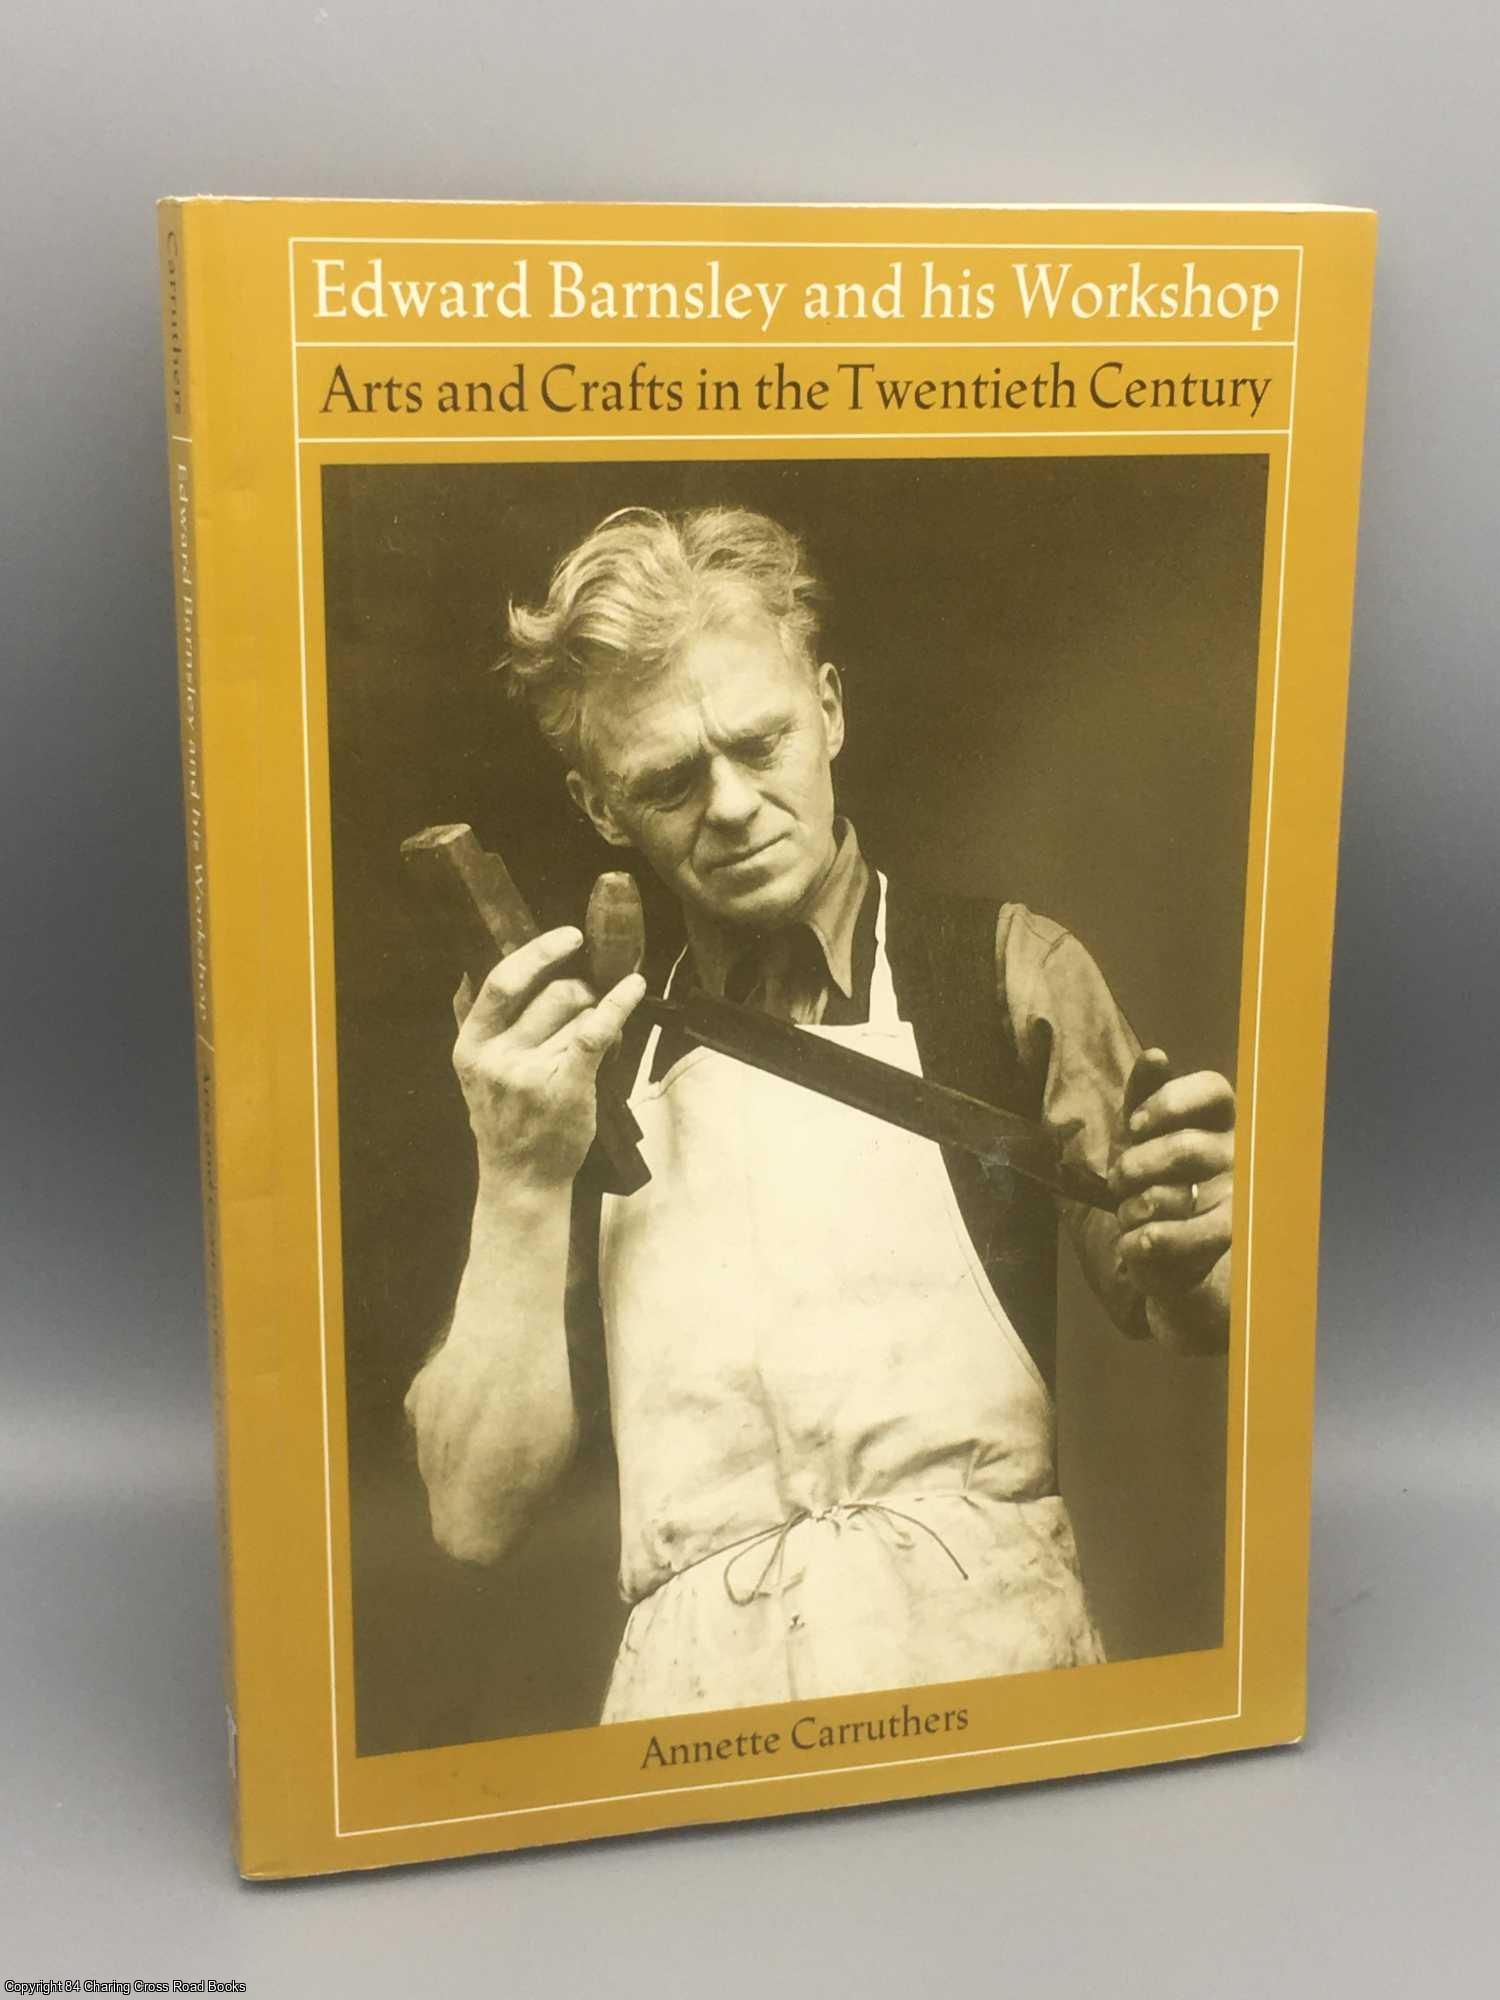 Carruthers, Annette - Edward Barnsley and his Workshop: arts and crafts in the twentieth century